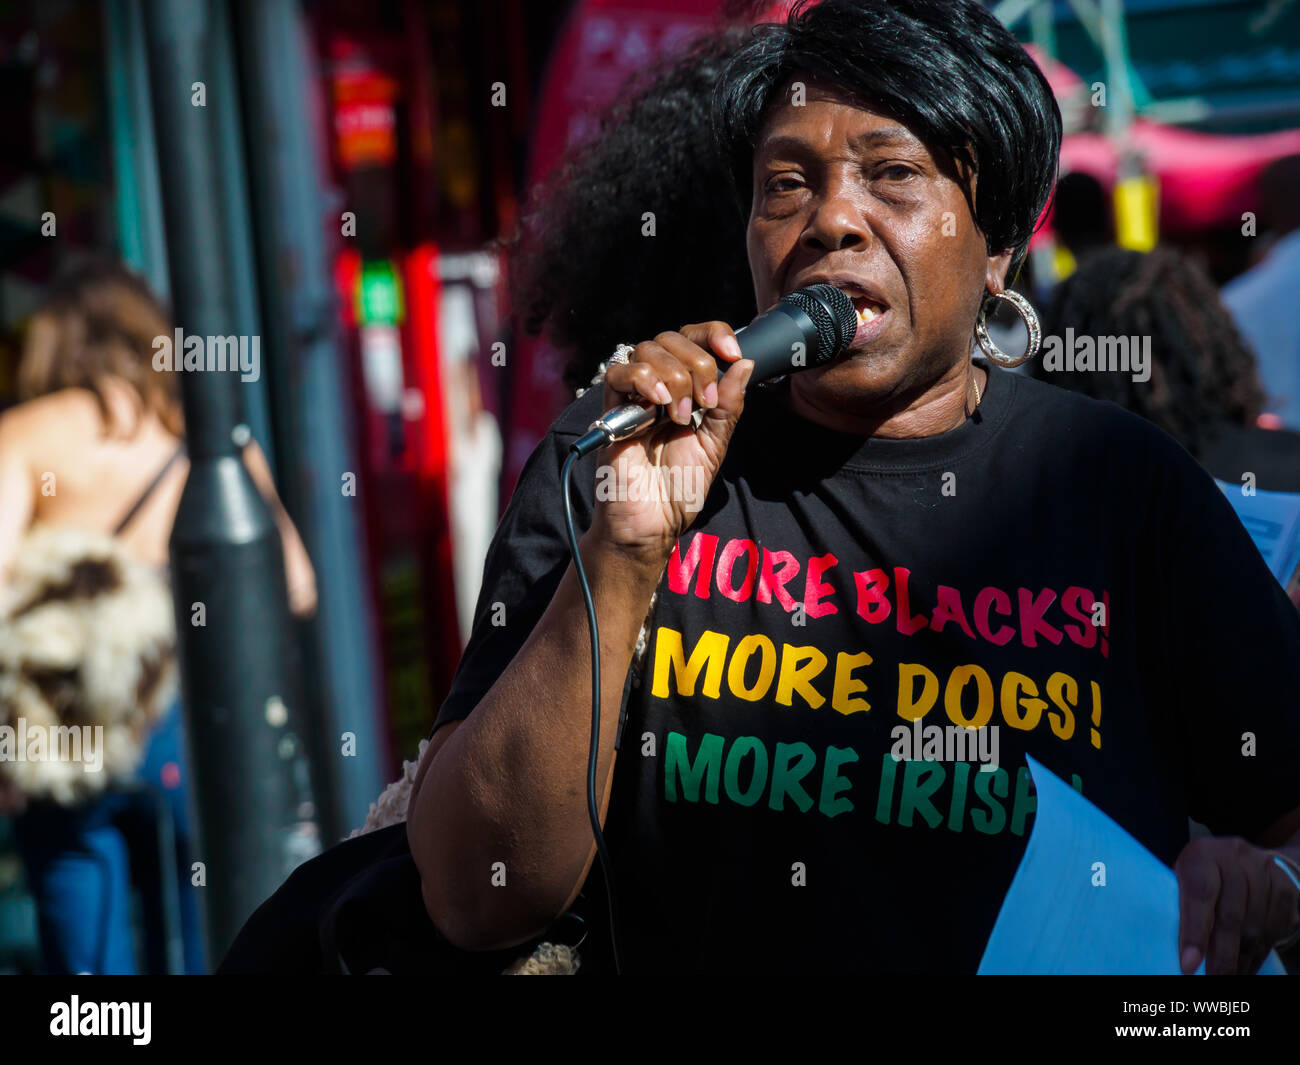 London, UK. 14th September 2019. Eulalee who has been fighting the Home Office for 16 years speaks at the Movement for Justice and Lambeth Unison Black Workers' Group protest in Brixton Market against the continuing persecution of Windrush family members and other migrants, calling for freedom of movement, the closure of immigration detention prisons, and an end to Brexit which is being used to whip up immigrant-bashing and nationalism to establish a Trump-style regime in Britain under Boris Johnson. Peter Marshall/Alamy Live News Stock Photo